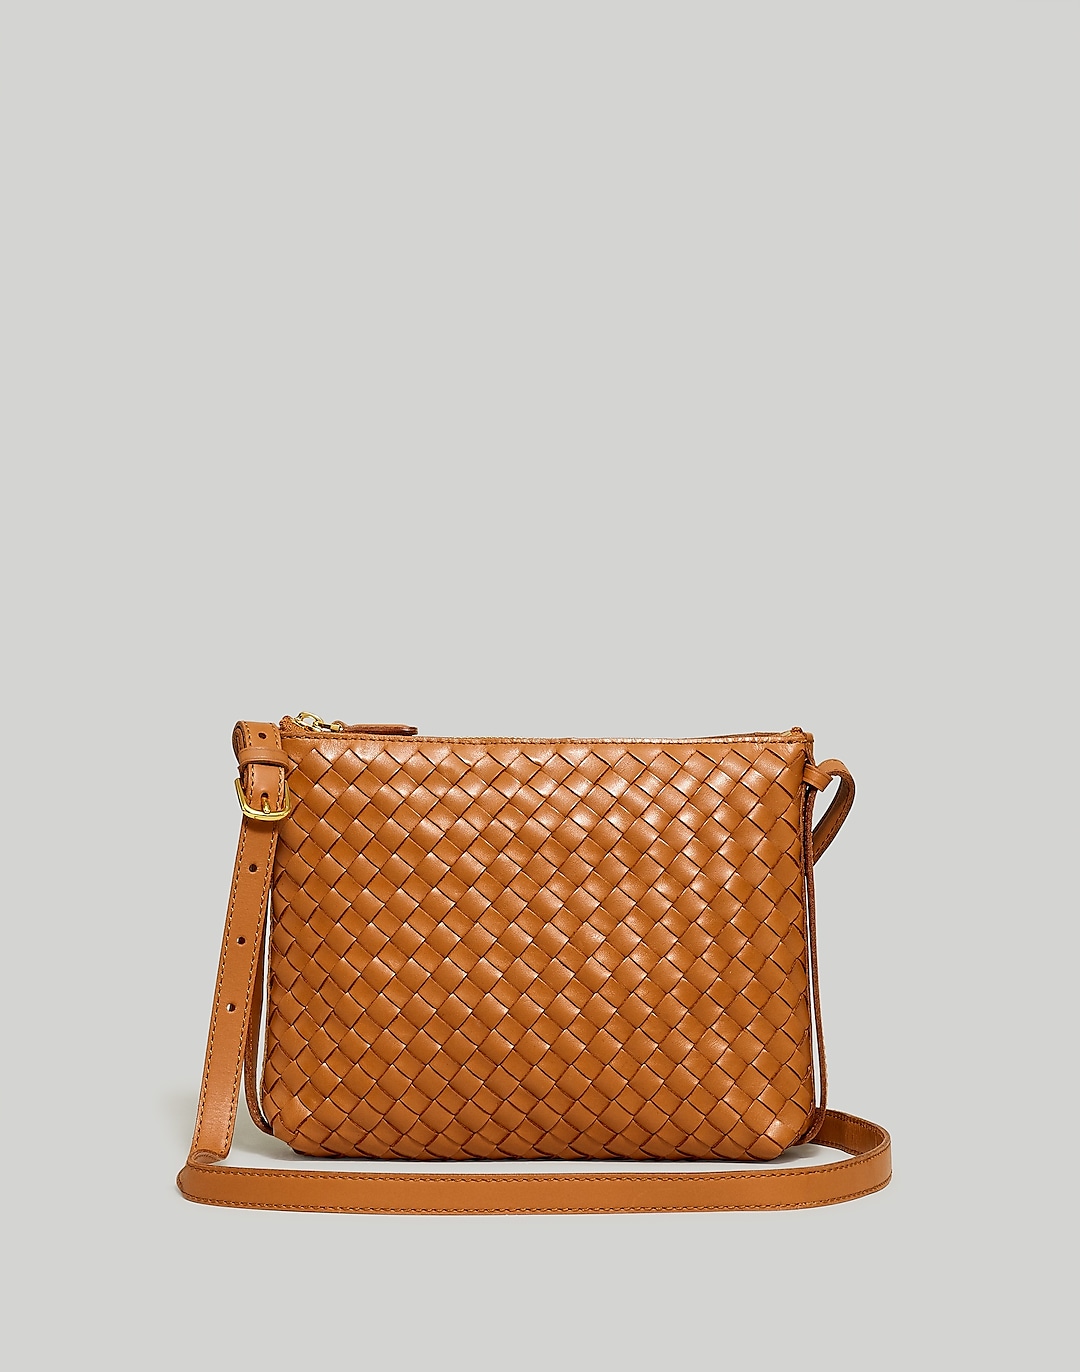 Crossbody Bag in Handwoven Leather | Madewell